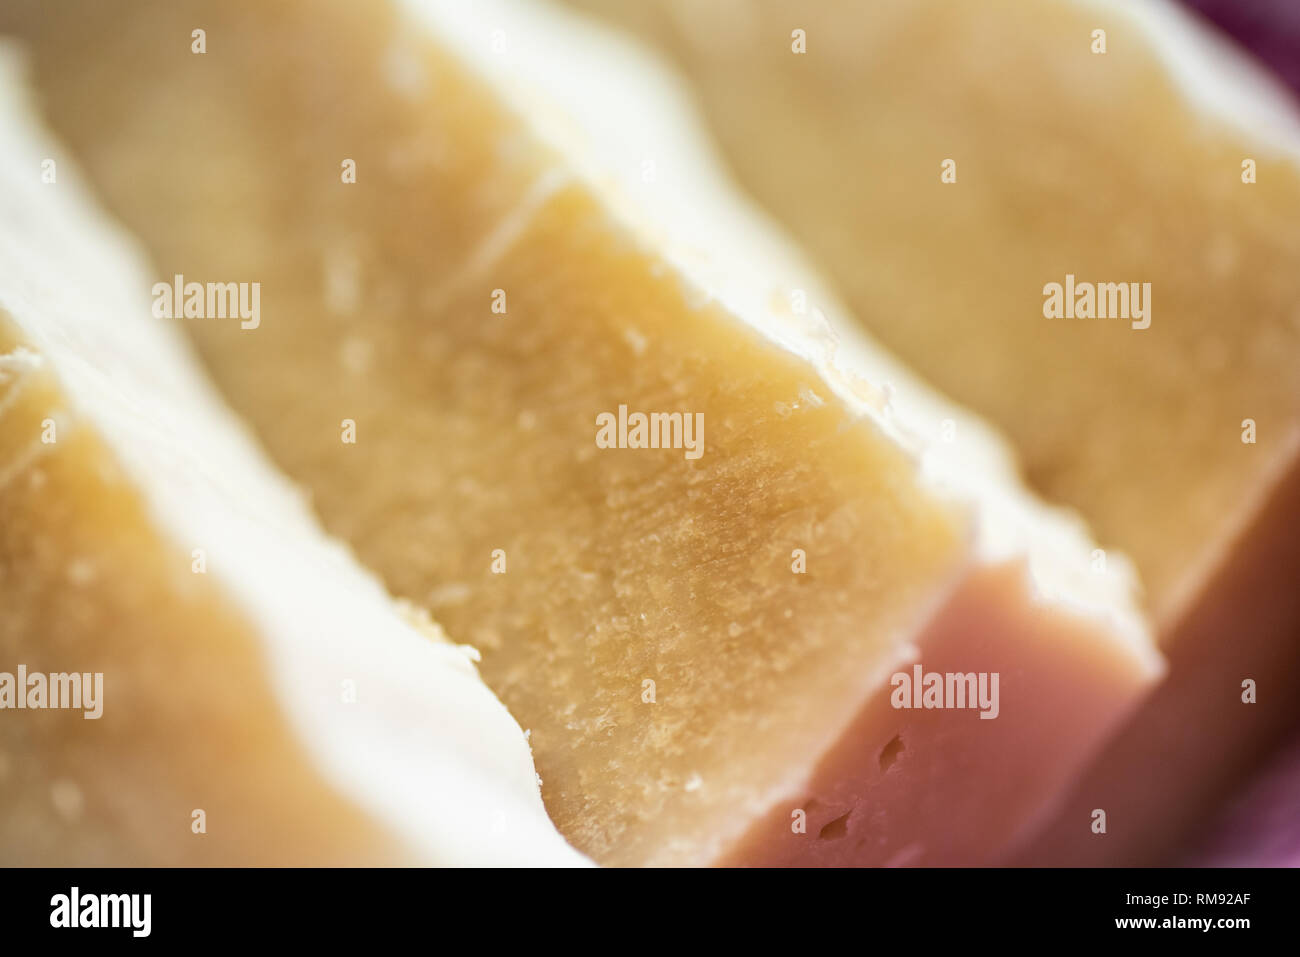 Several bars of handcrafted soap at an angle. Stock Photo